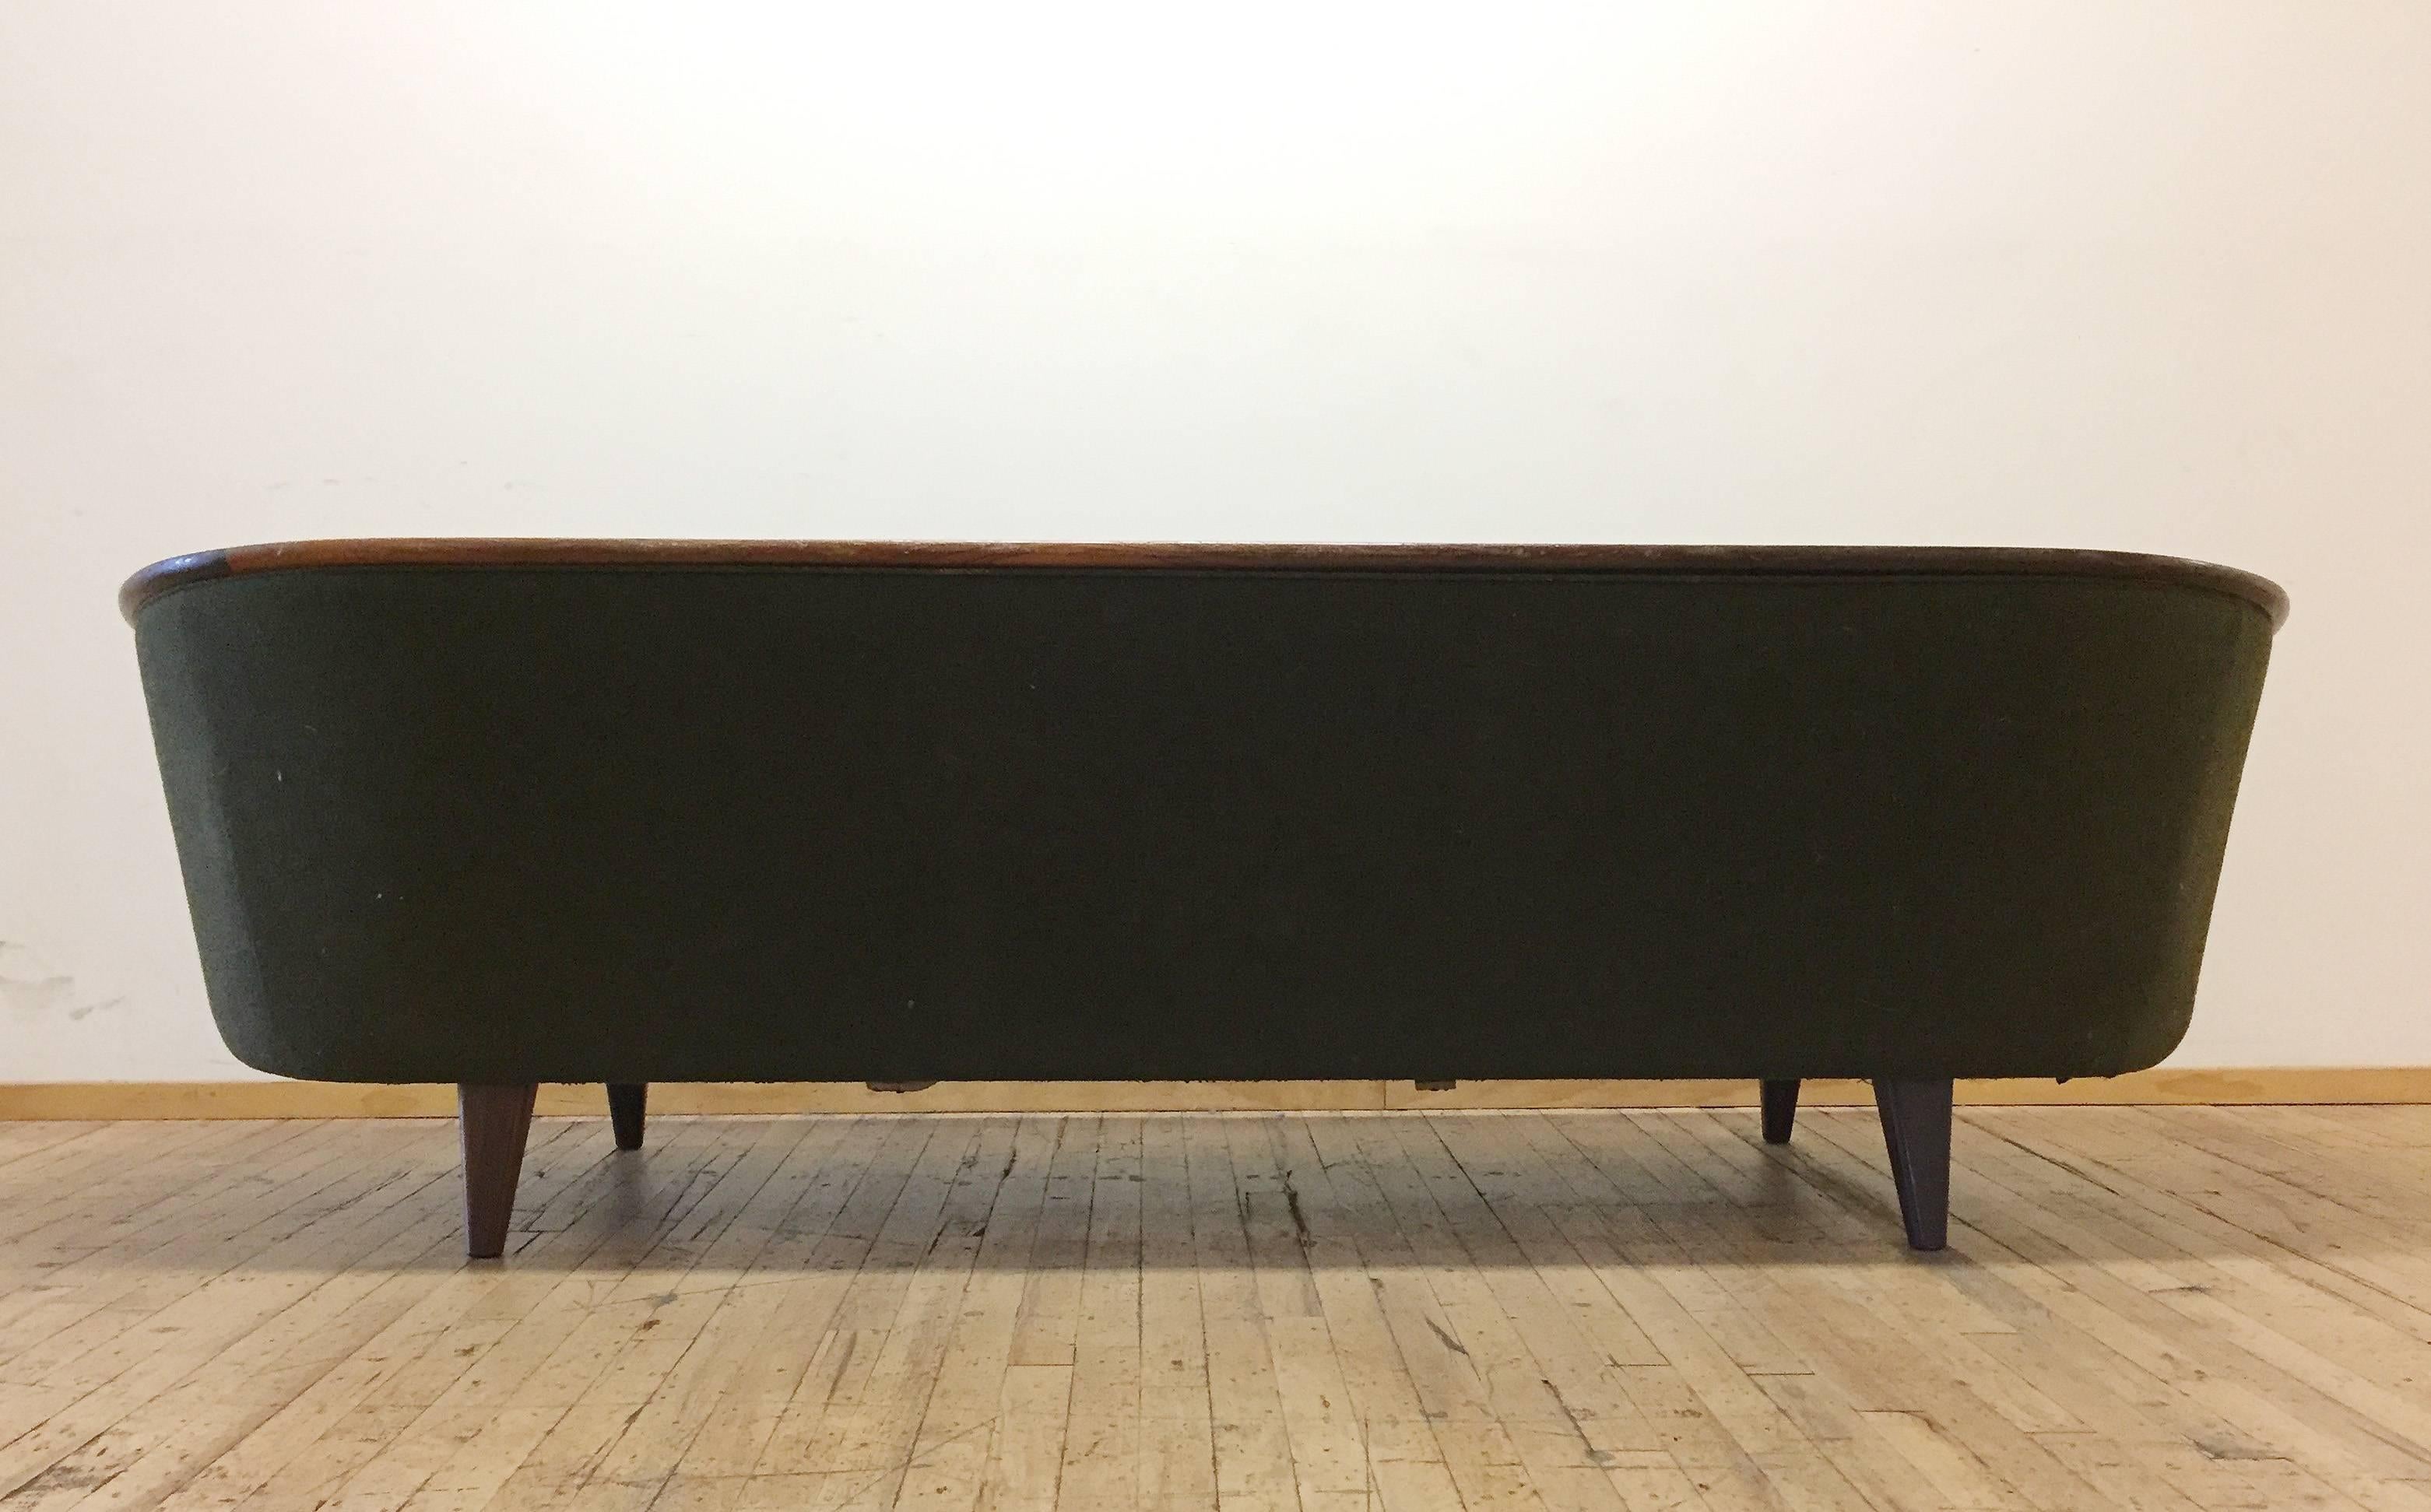 Beautiful and early P.I. Langlos Fabrikker, Stranda sofa design. I believe Rosewood legs and detailing. Design in the style of Illum Wikkelso.

Original early paper tag still attached on underside. Details the product number.

Following is